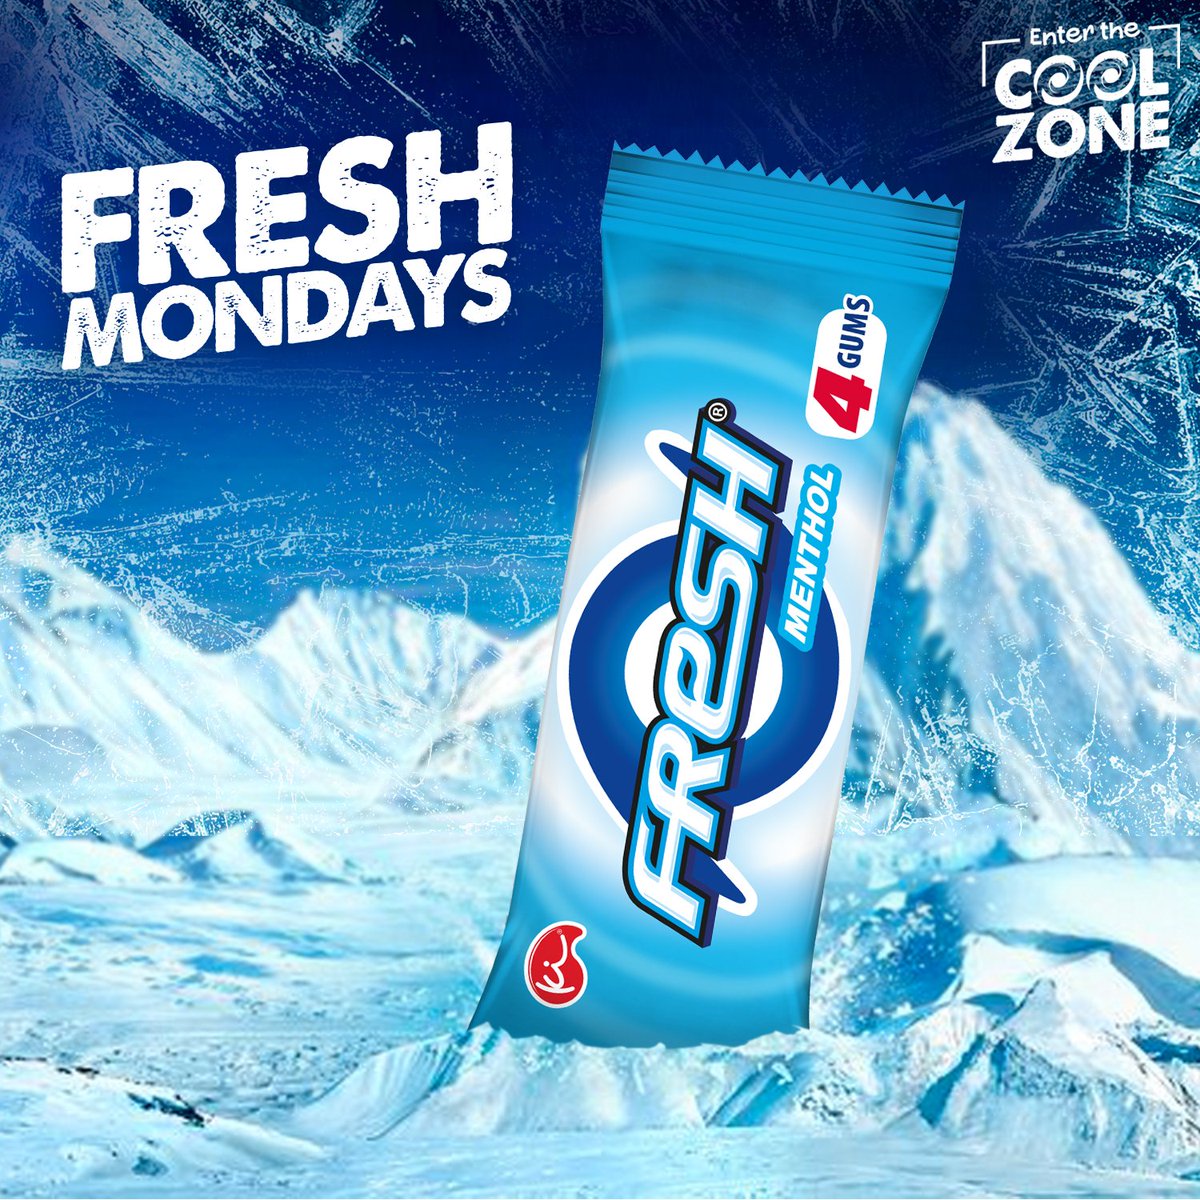 Don’t ruin your convos with bad breath. Pop some Fresh Menthol for the ultimate confidence boost. #Fresh Mondays #EnterTheCoolZone #FreshChewingGum